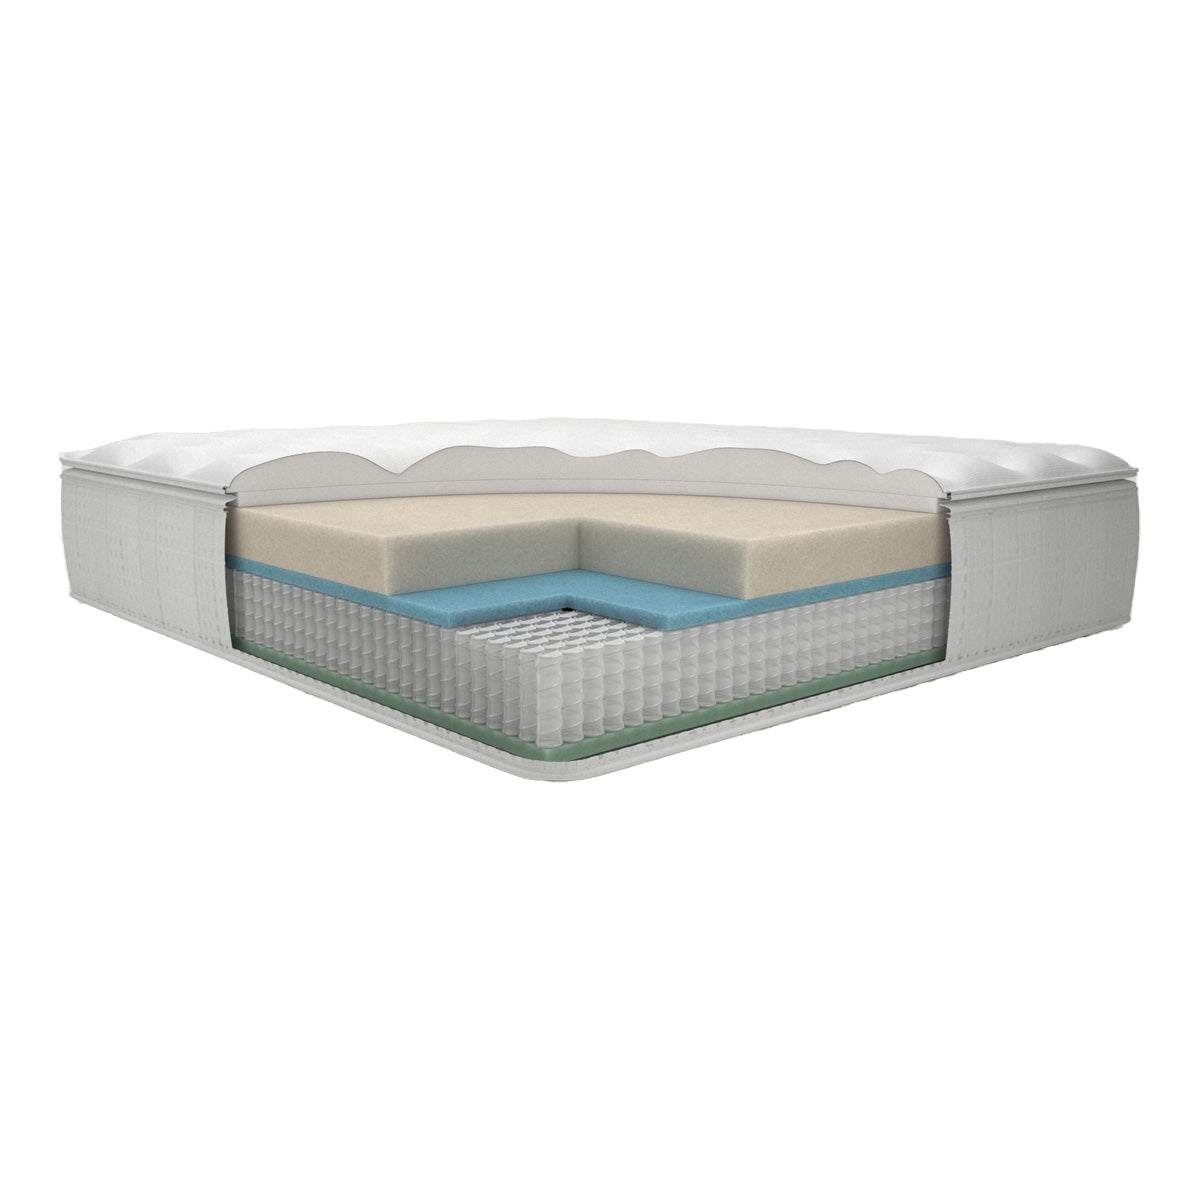 Hotel Collection Pillow Top Mattress by Englander, Image showing the Materials inside the Mattress